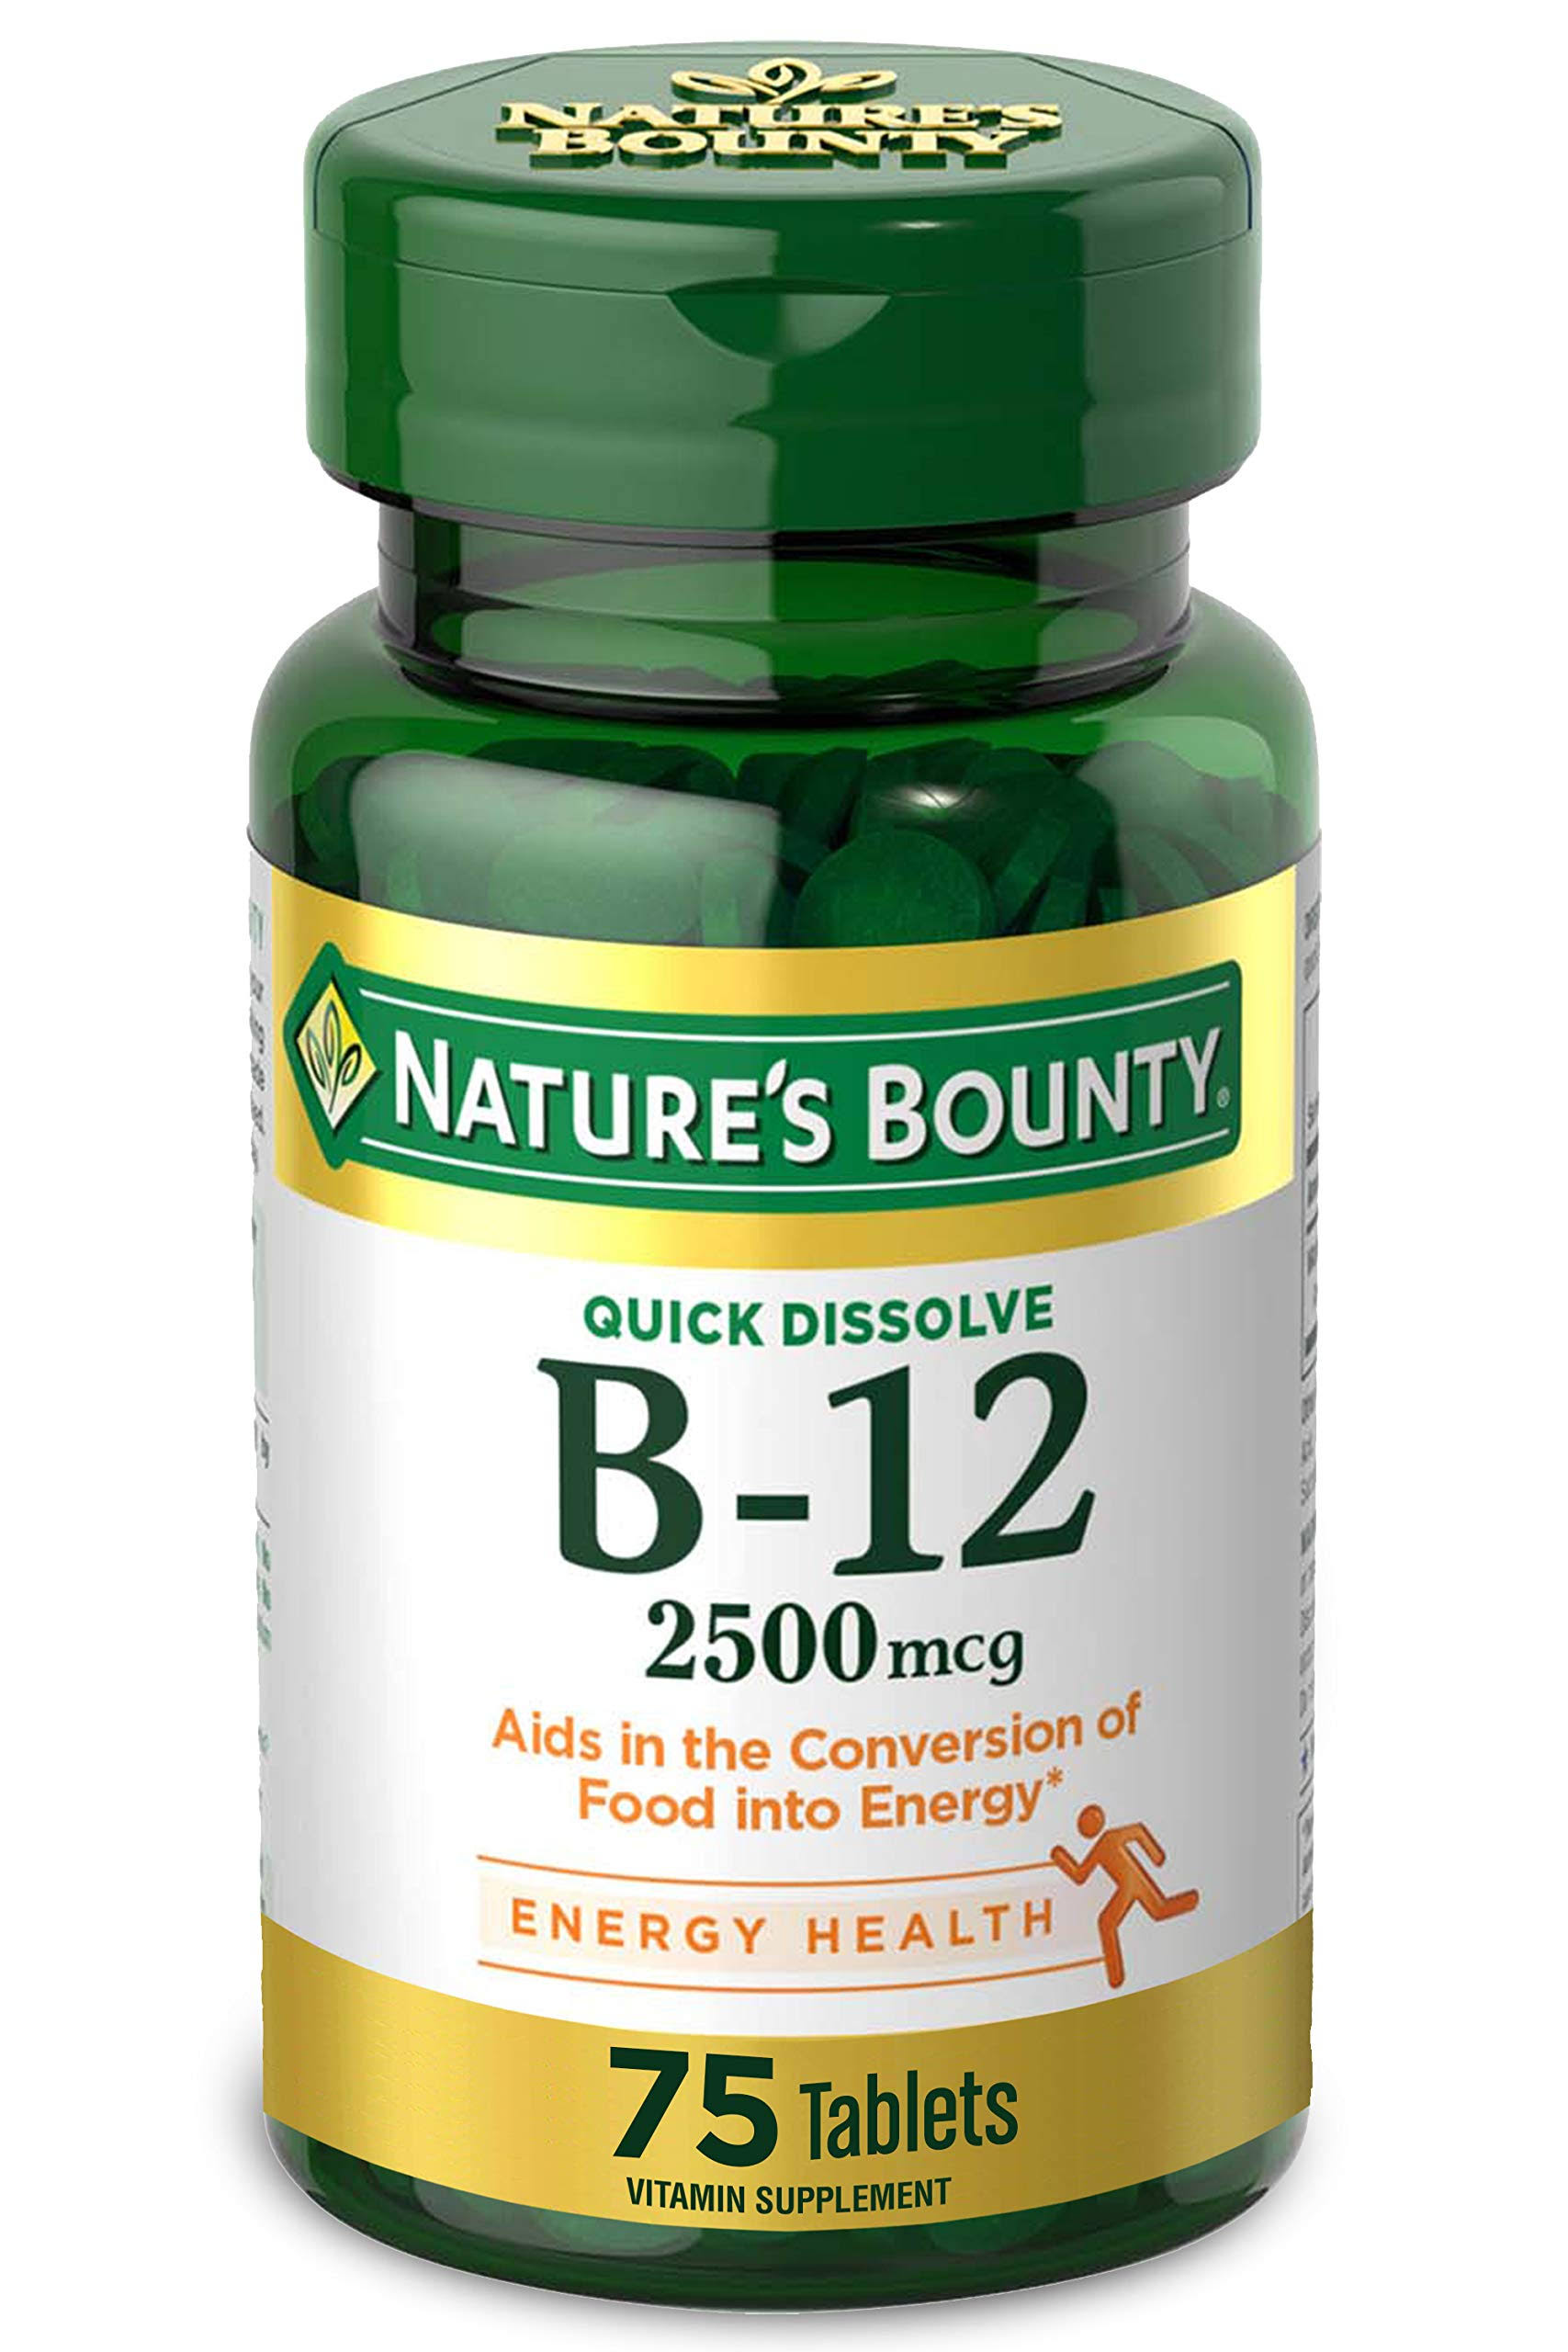 Nature's Bounty B-12 Supplement - Natural Cherry Flavor, 75 Quick Dissolve Tablets